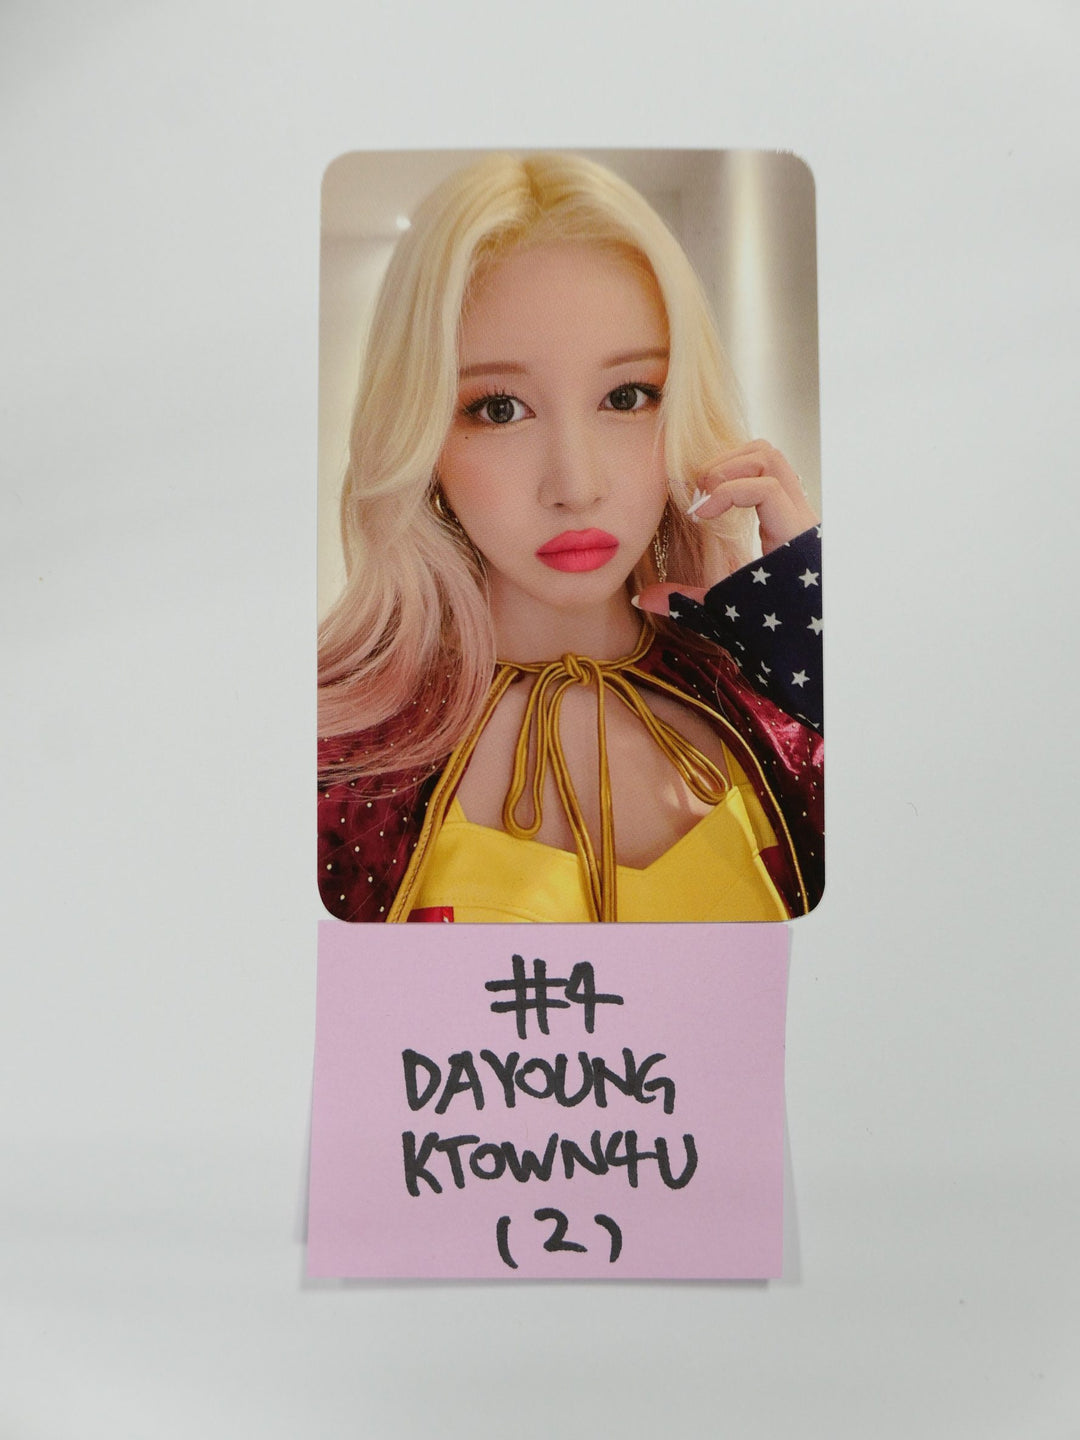 WJSN Chocome "Super Yuppers !" 2nd Single - Ktown4U Fansign Event Photocard